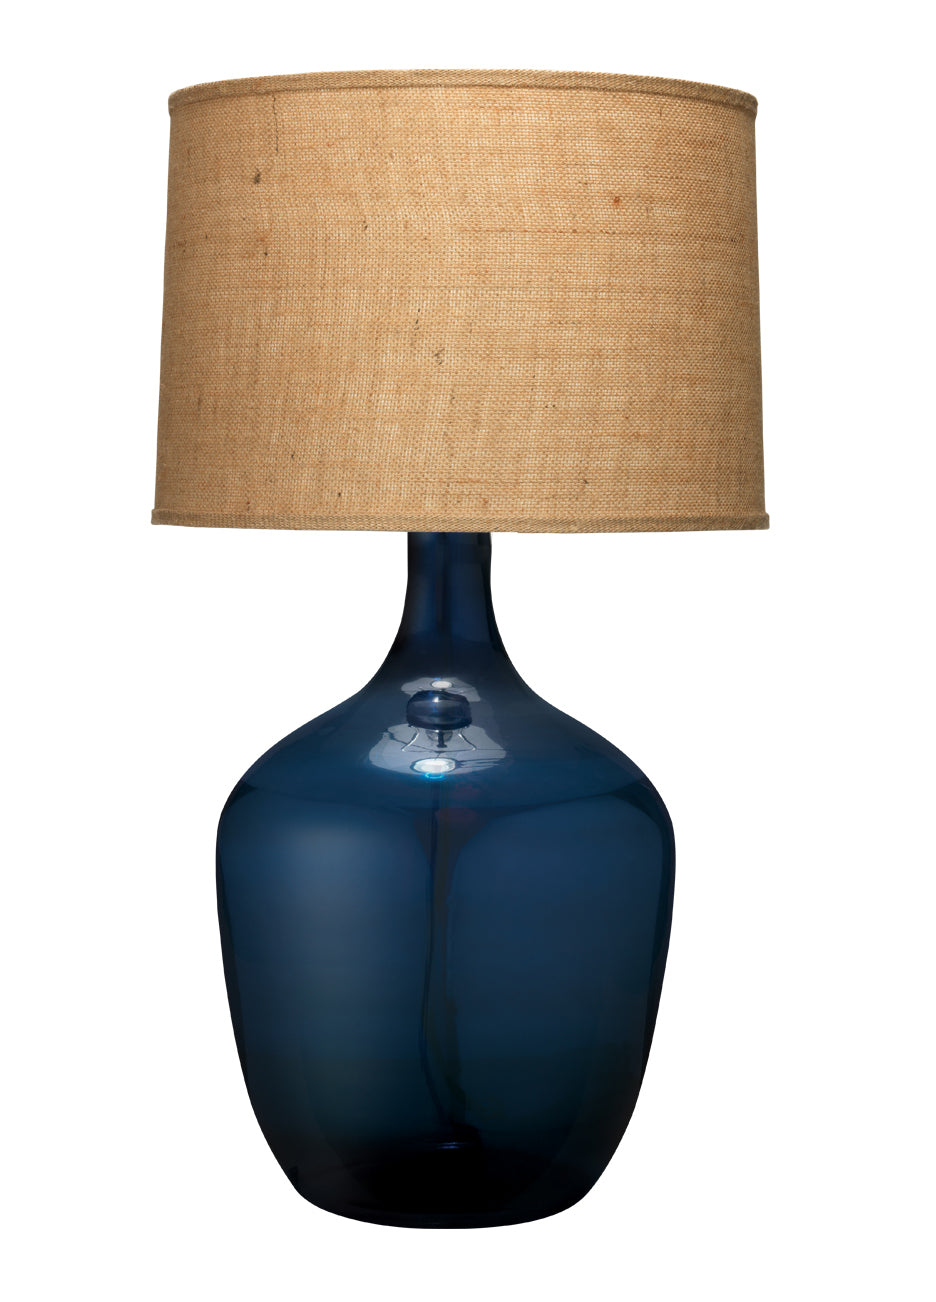 Plum Jar Table Lamp, Extra Large in Navy Blue Glass with Large Drum Shade in Natural Burlap